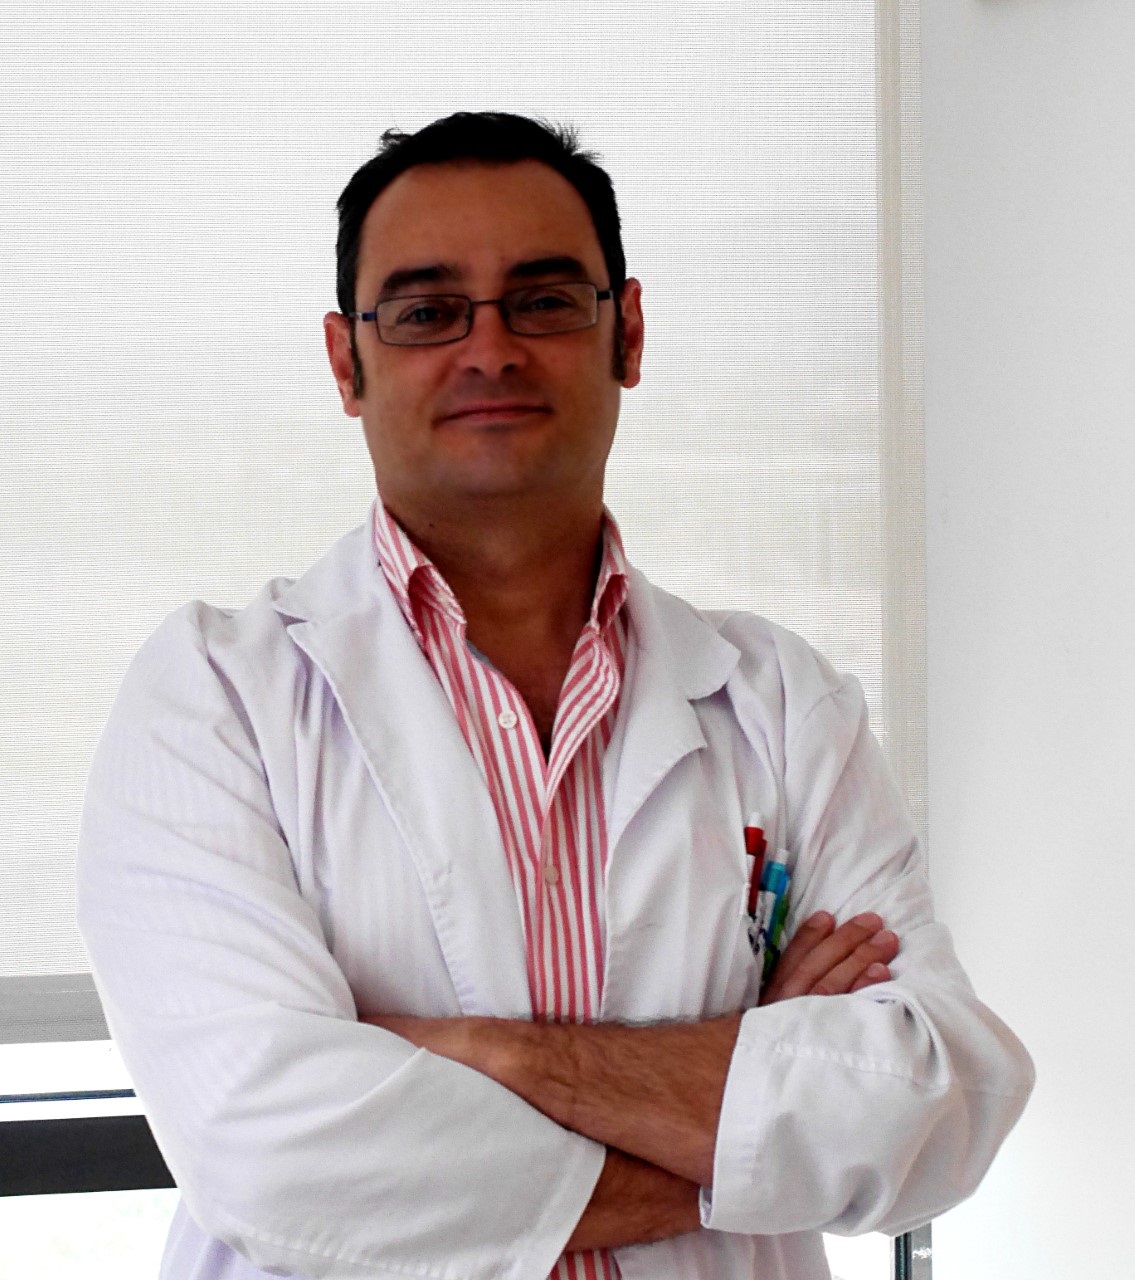 dr_luis_alonso_quironsalud_malaga